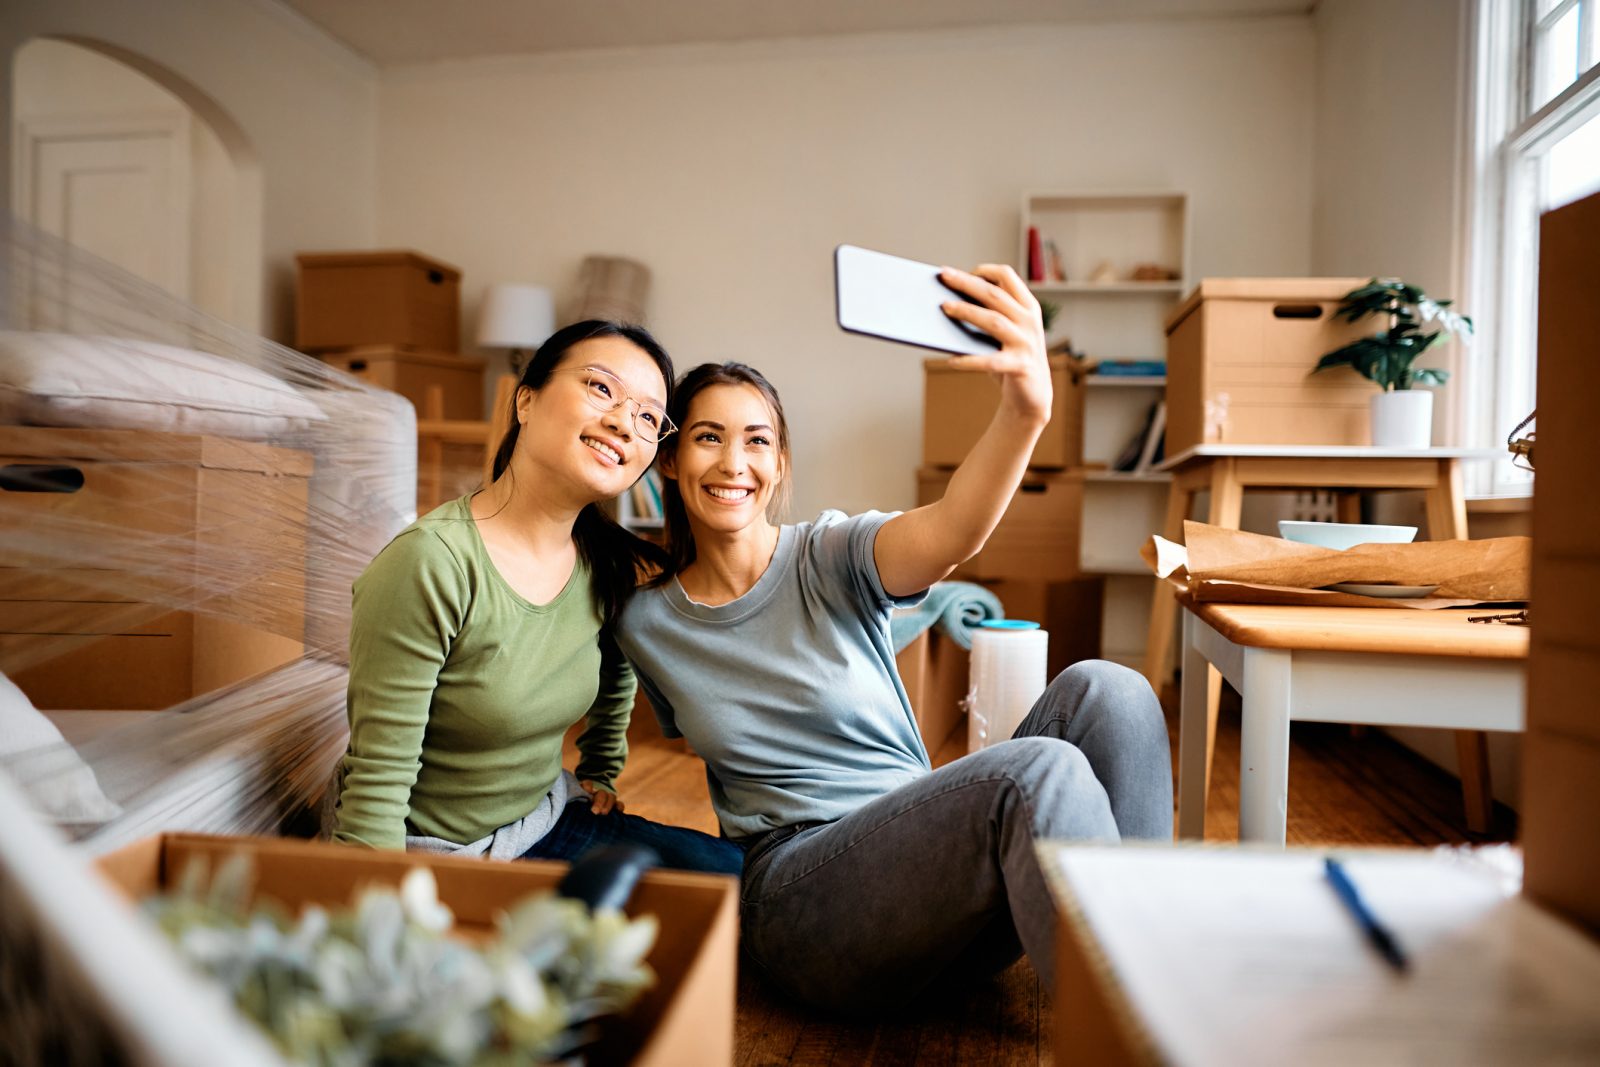 Two young women take a selfie while sitting in the middle of a room full of cardboard moving boxes.